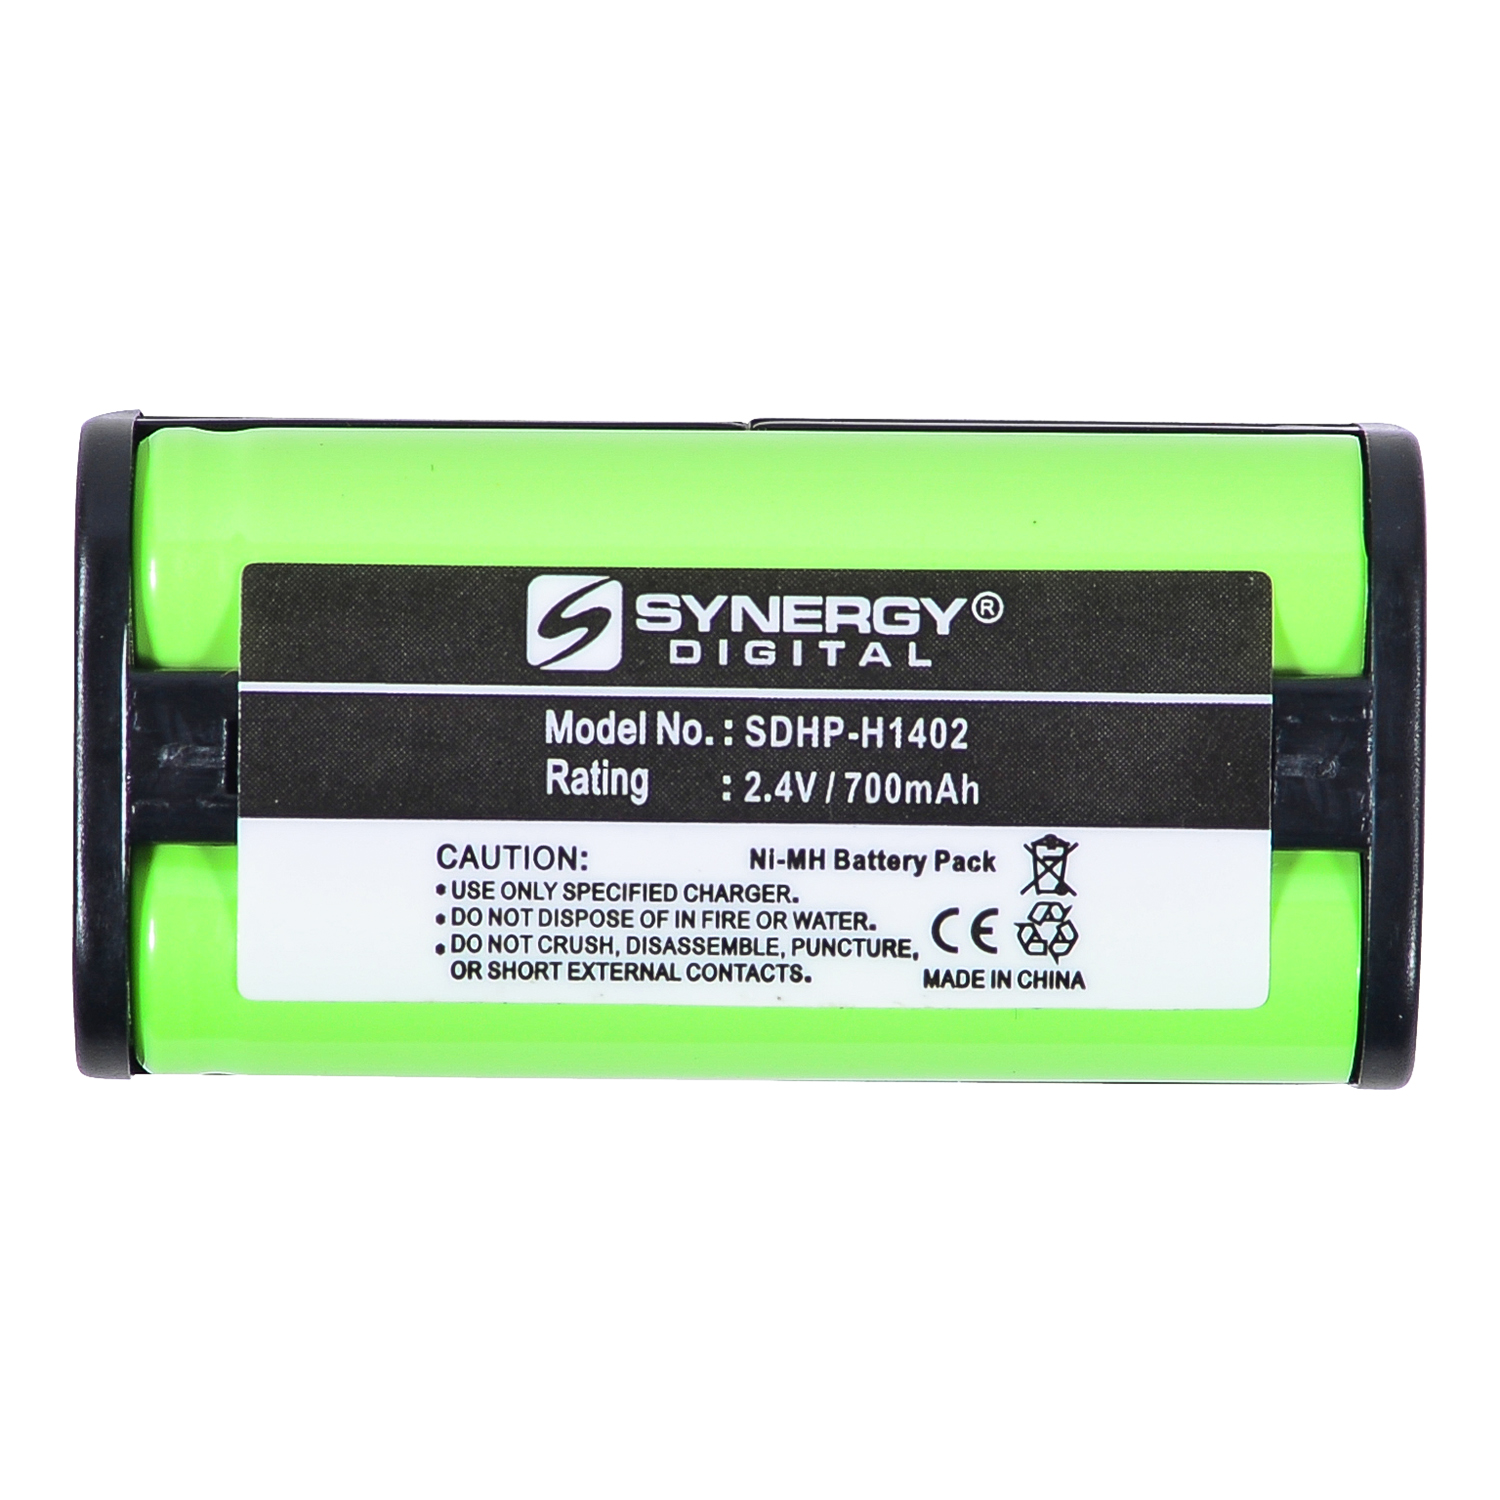 EM-CPH-537 - Ni-MH, 2.4 Volt, 700 mAh, Ultra Hi-Capacity Battery - Replacement Battery for Sony MDR-RF810/840/850/860/925/970/4000  Cordless Phone Battery